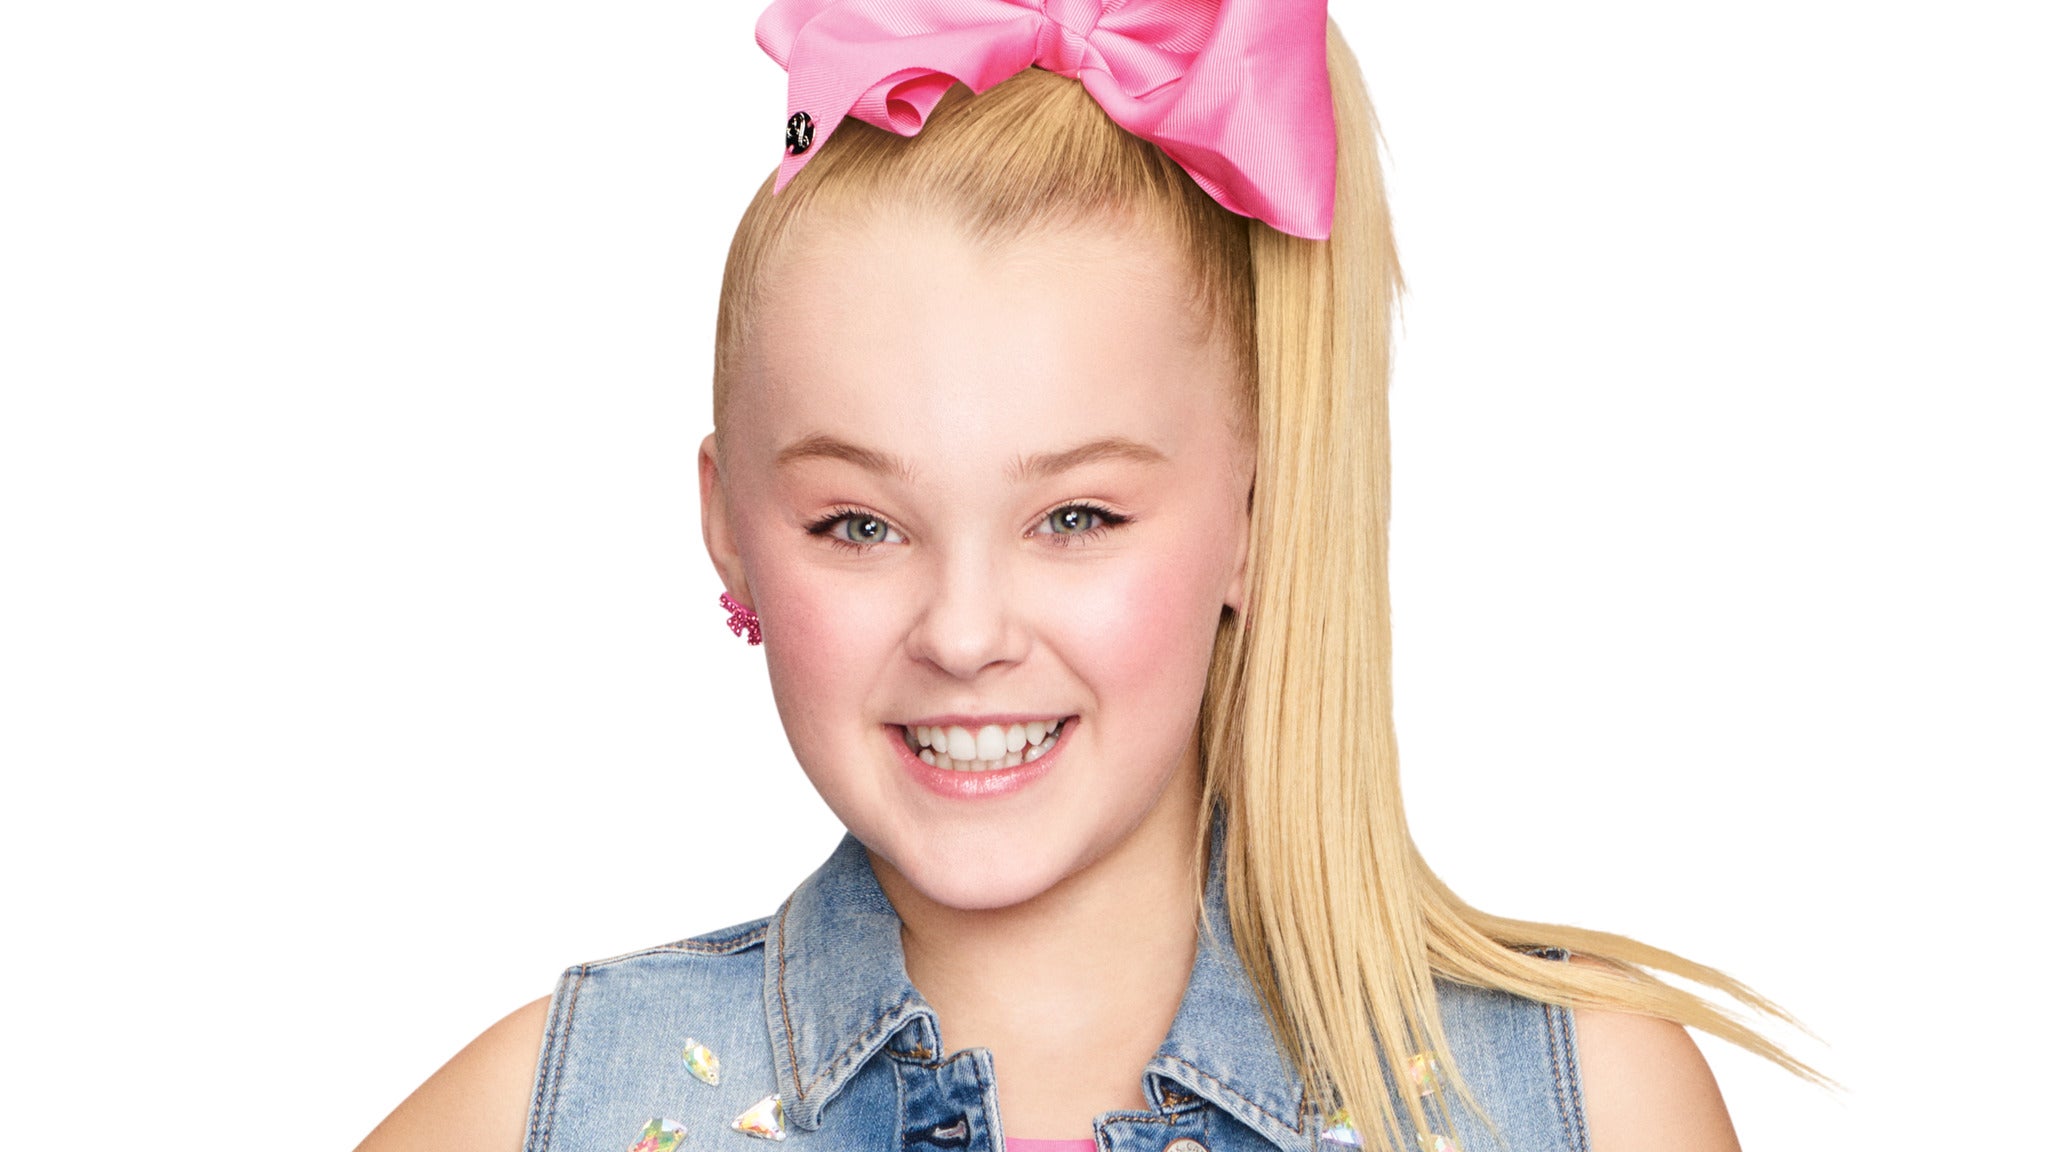 Nickelodeon's JoJo Siwa D.R.E.A.M. The Tour in Indianapolis event information